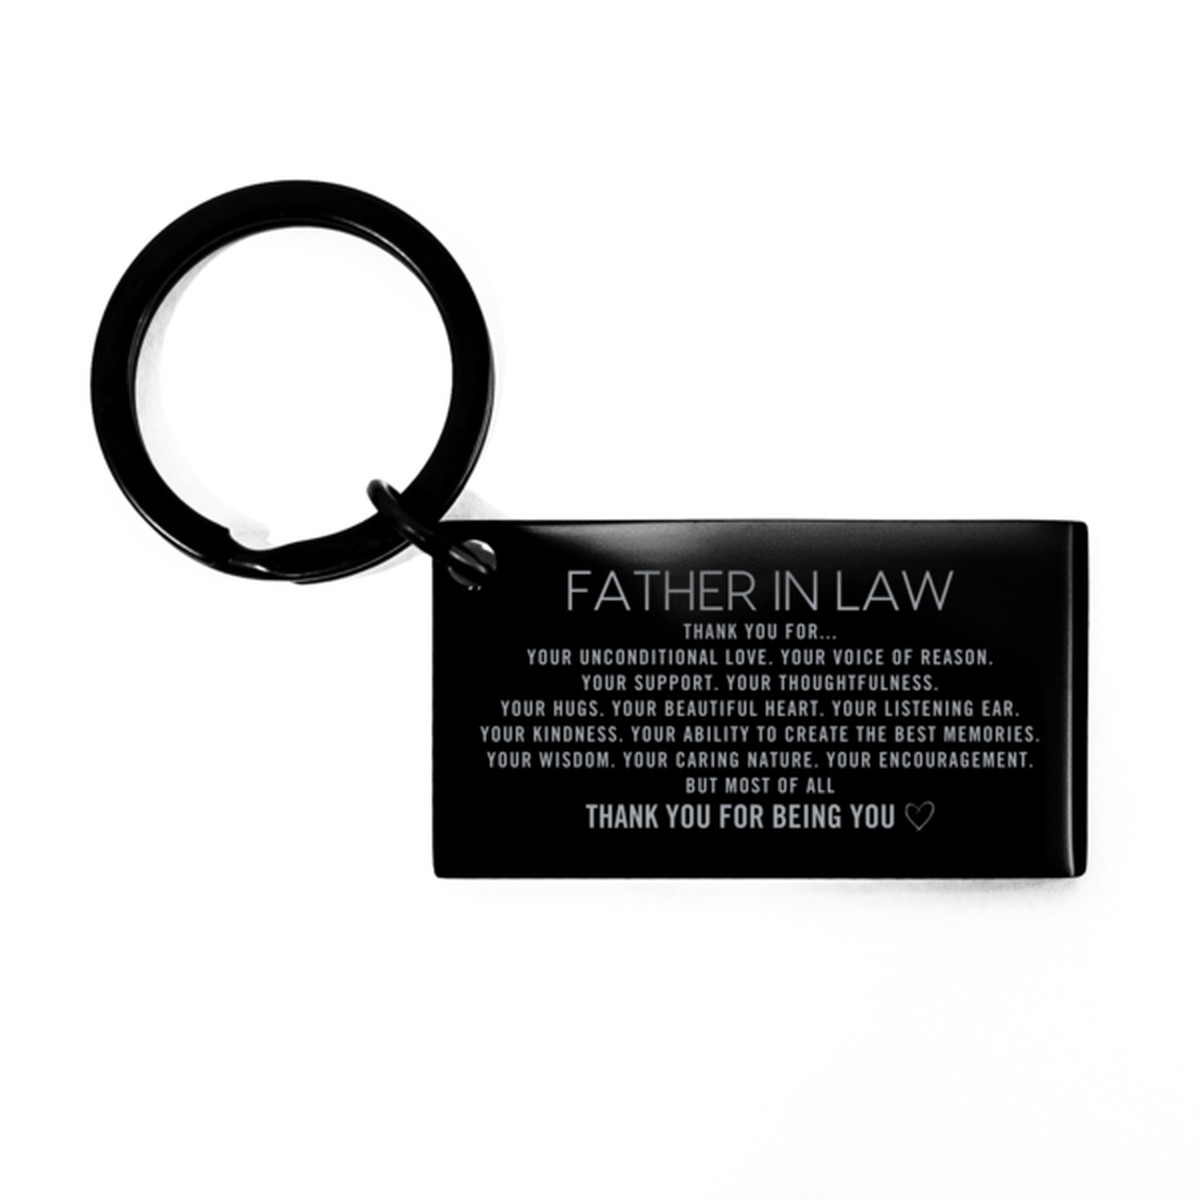 Father In Law Keychain Custom, Engraved Gifts For Father In Law Christmas Graduation Birthday Gifts for Men Women Father In Law Thank you for Your unconditional love